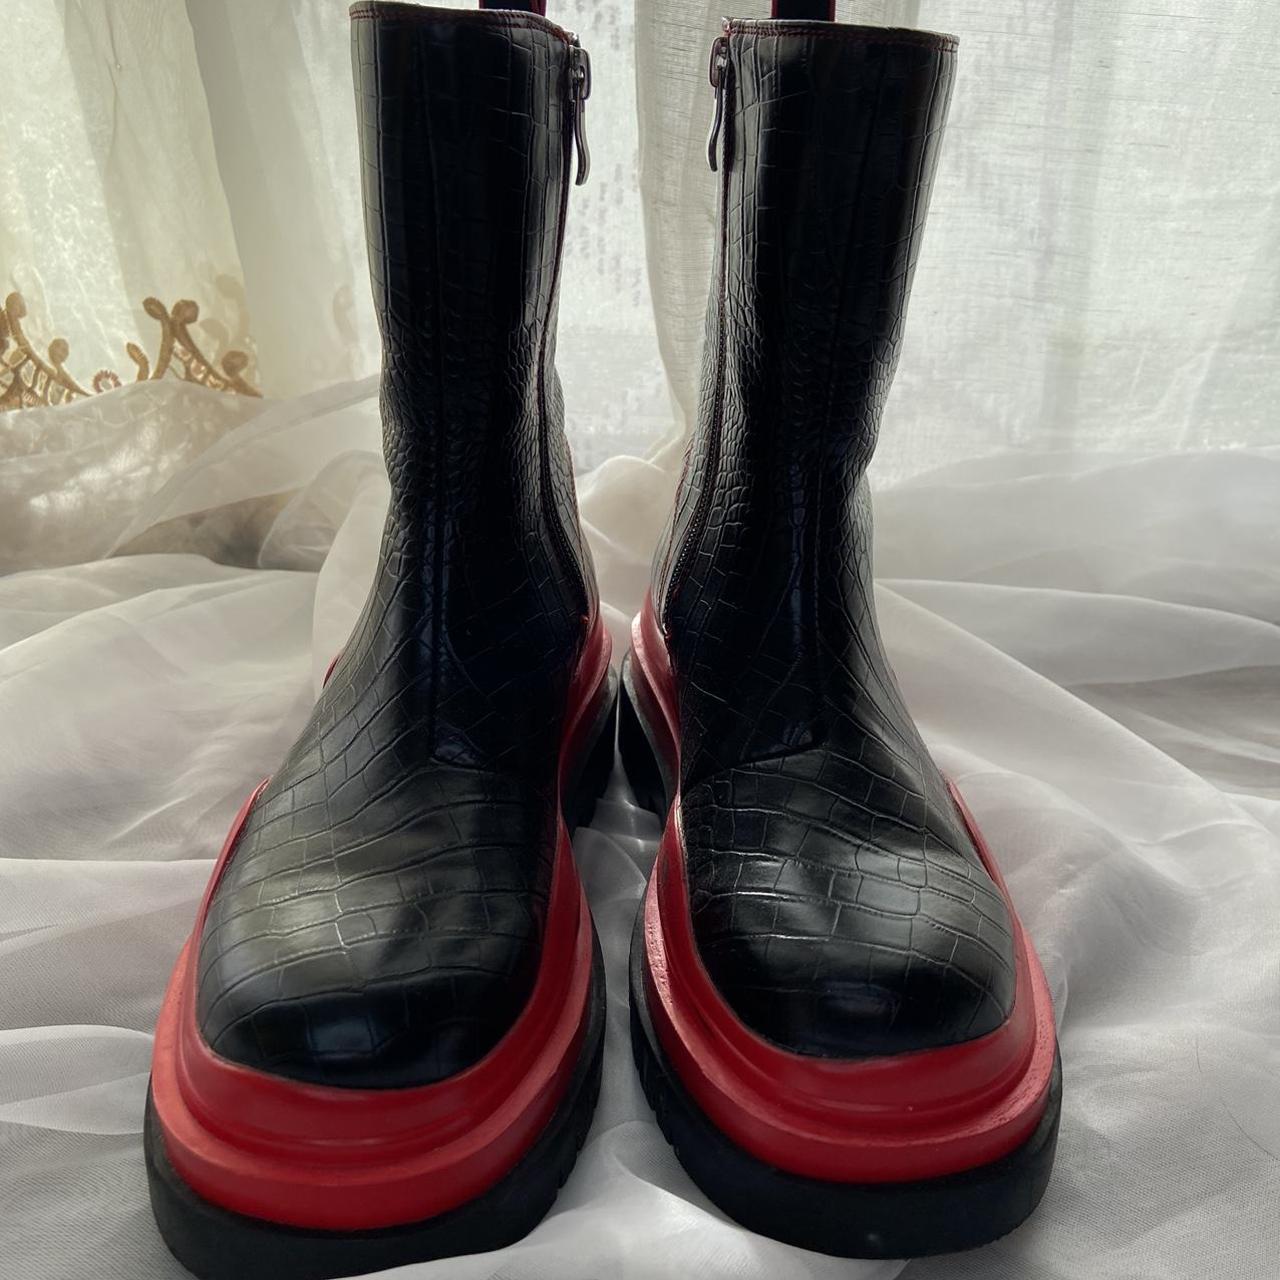 Women's Black and Red Boots | Depop